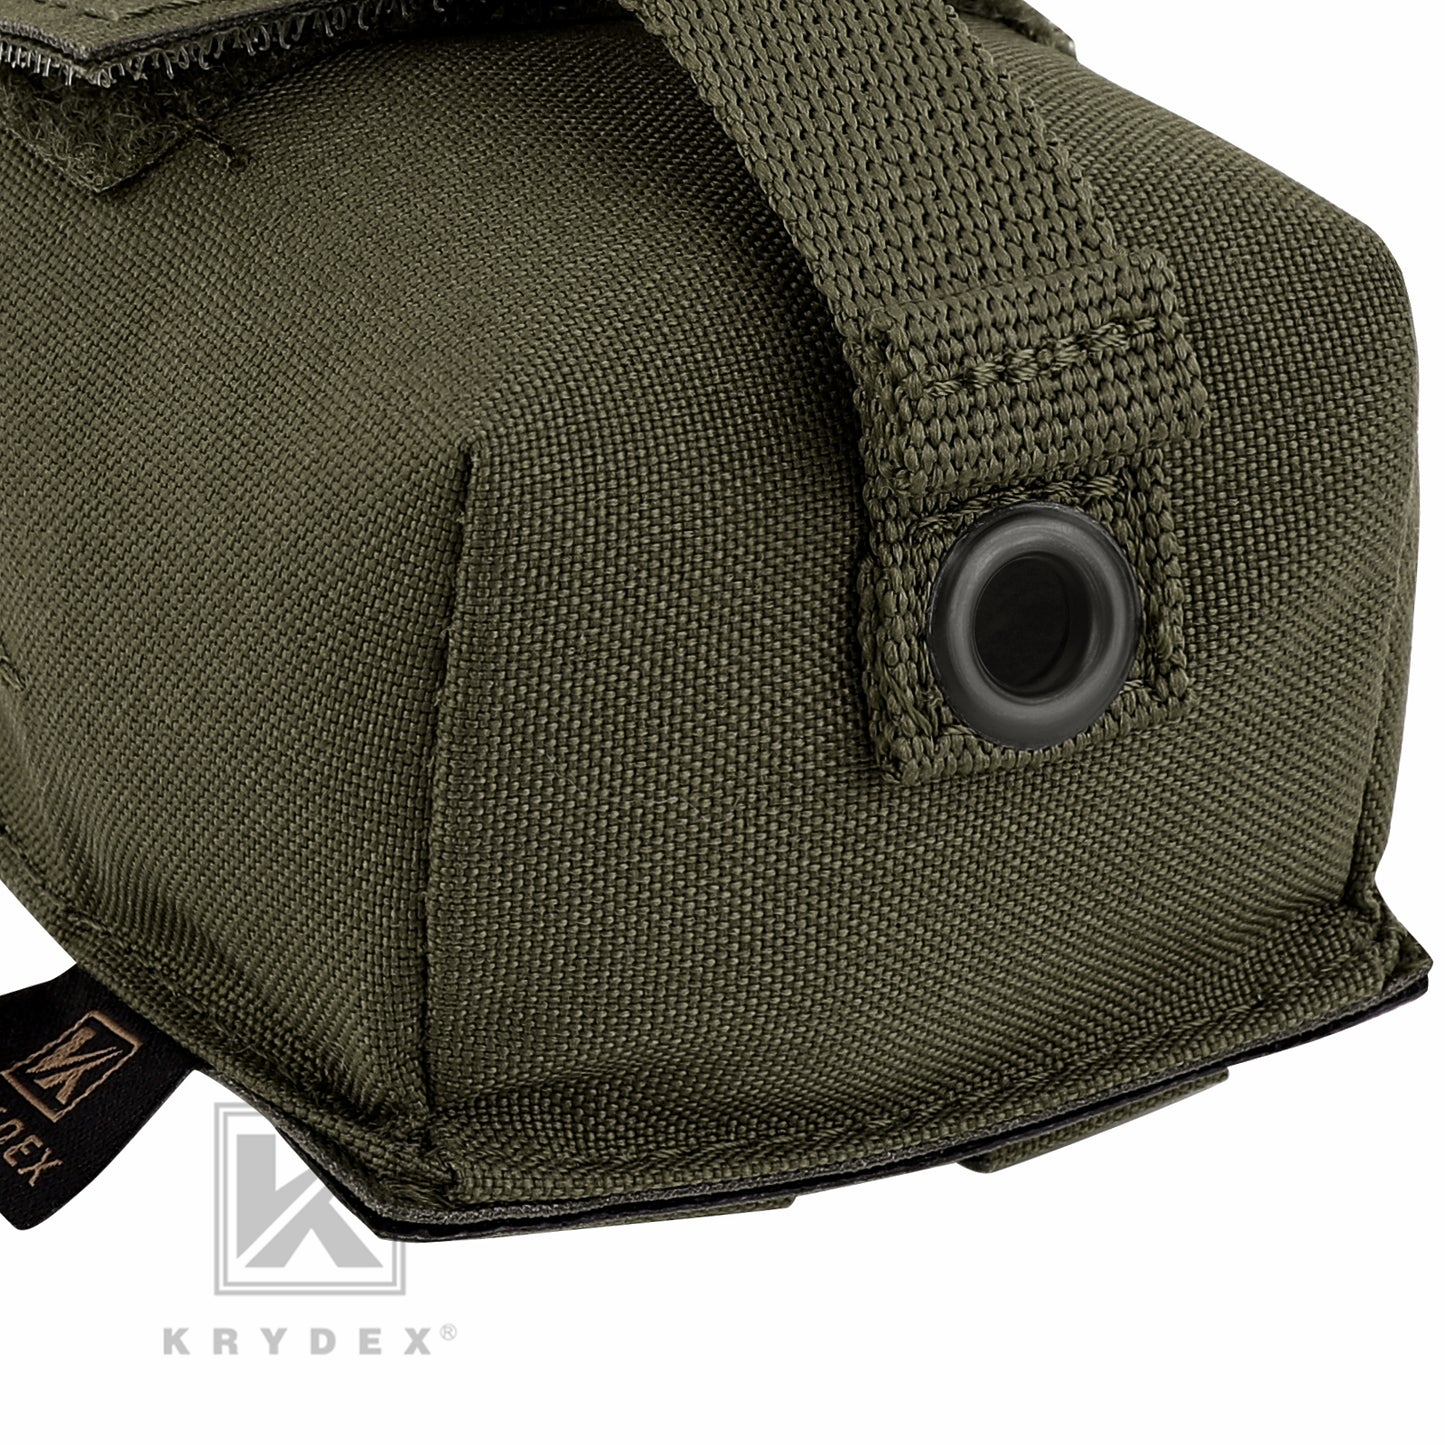 KRYDEX Tactical Frag Grenade Pouch MOLLE PALS & Belt System Small Handy EDC Glove Pouch